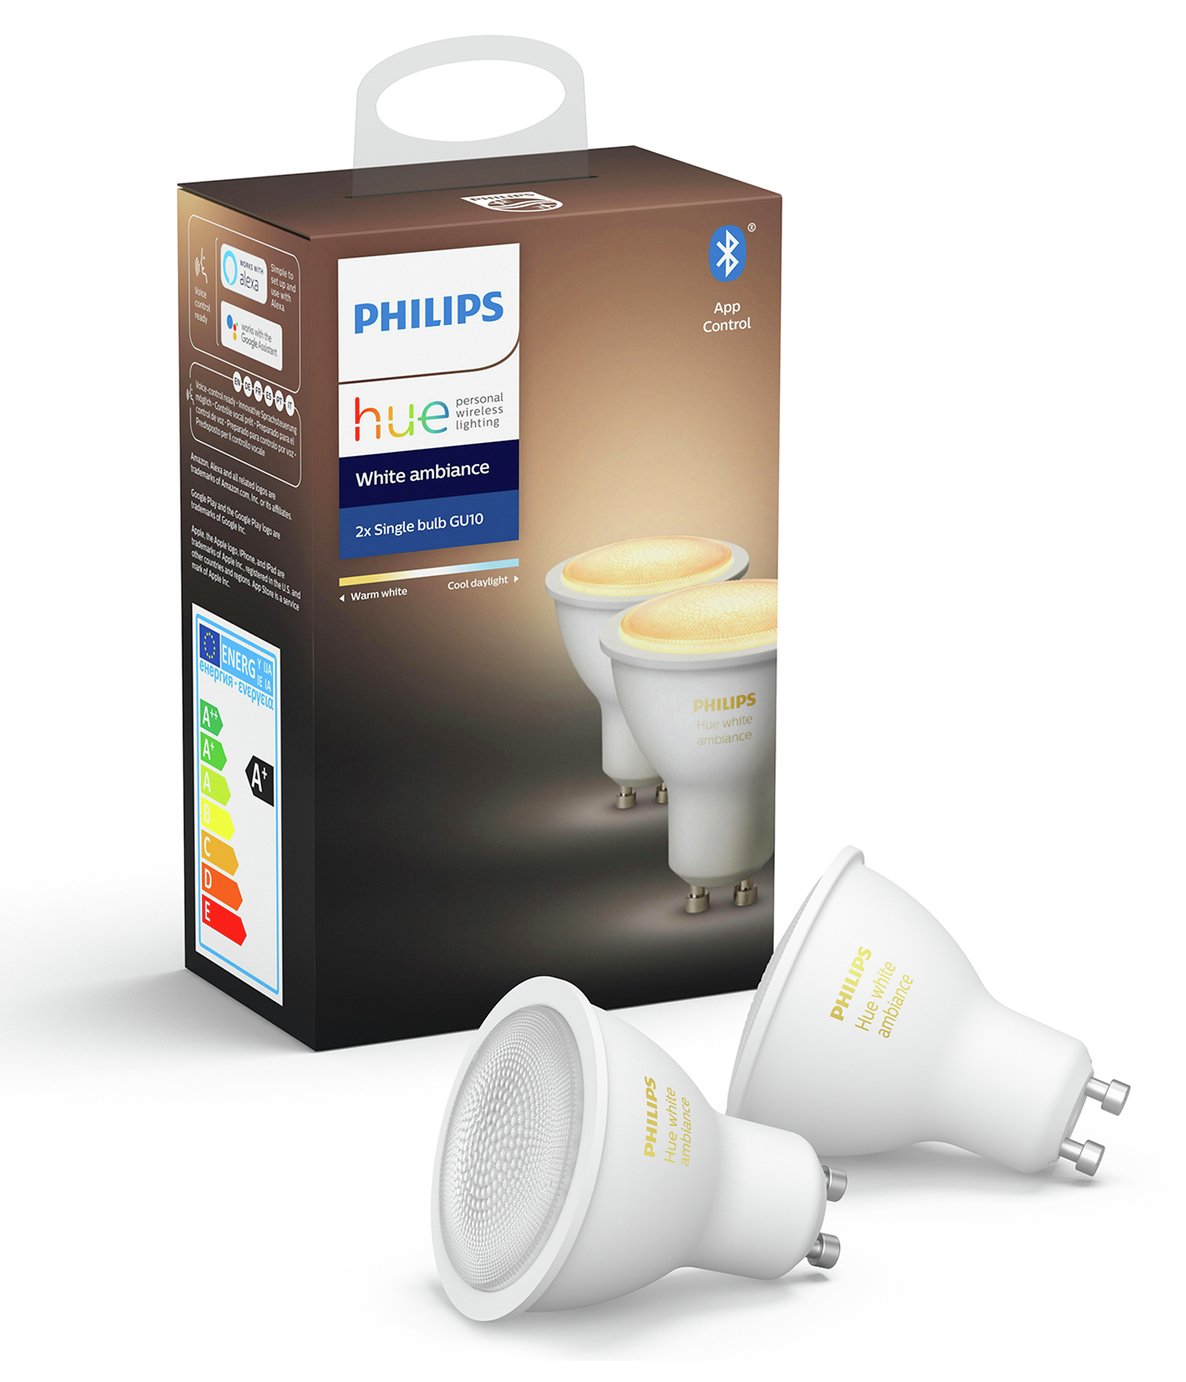 Philips Hue GU10 White Smart Bulb with Bluetooth -2 Pack Review